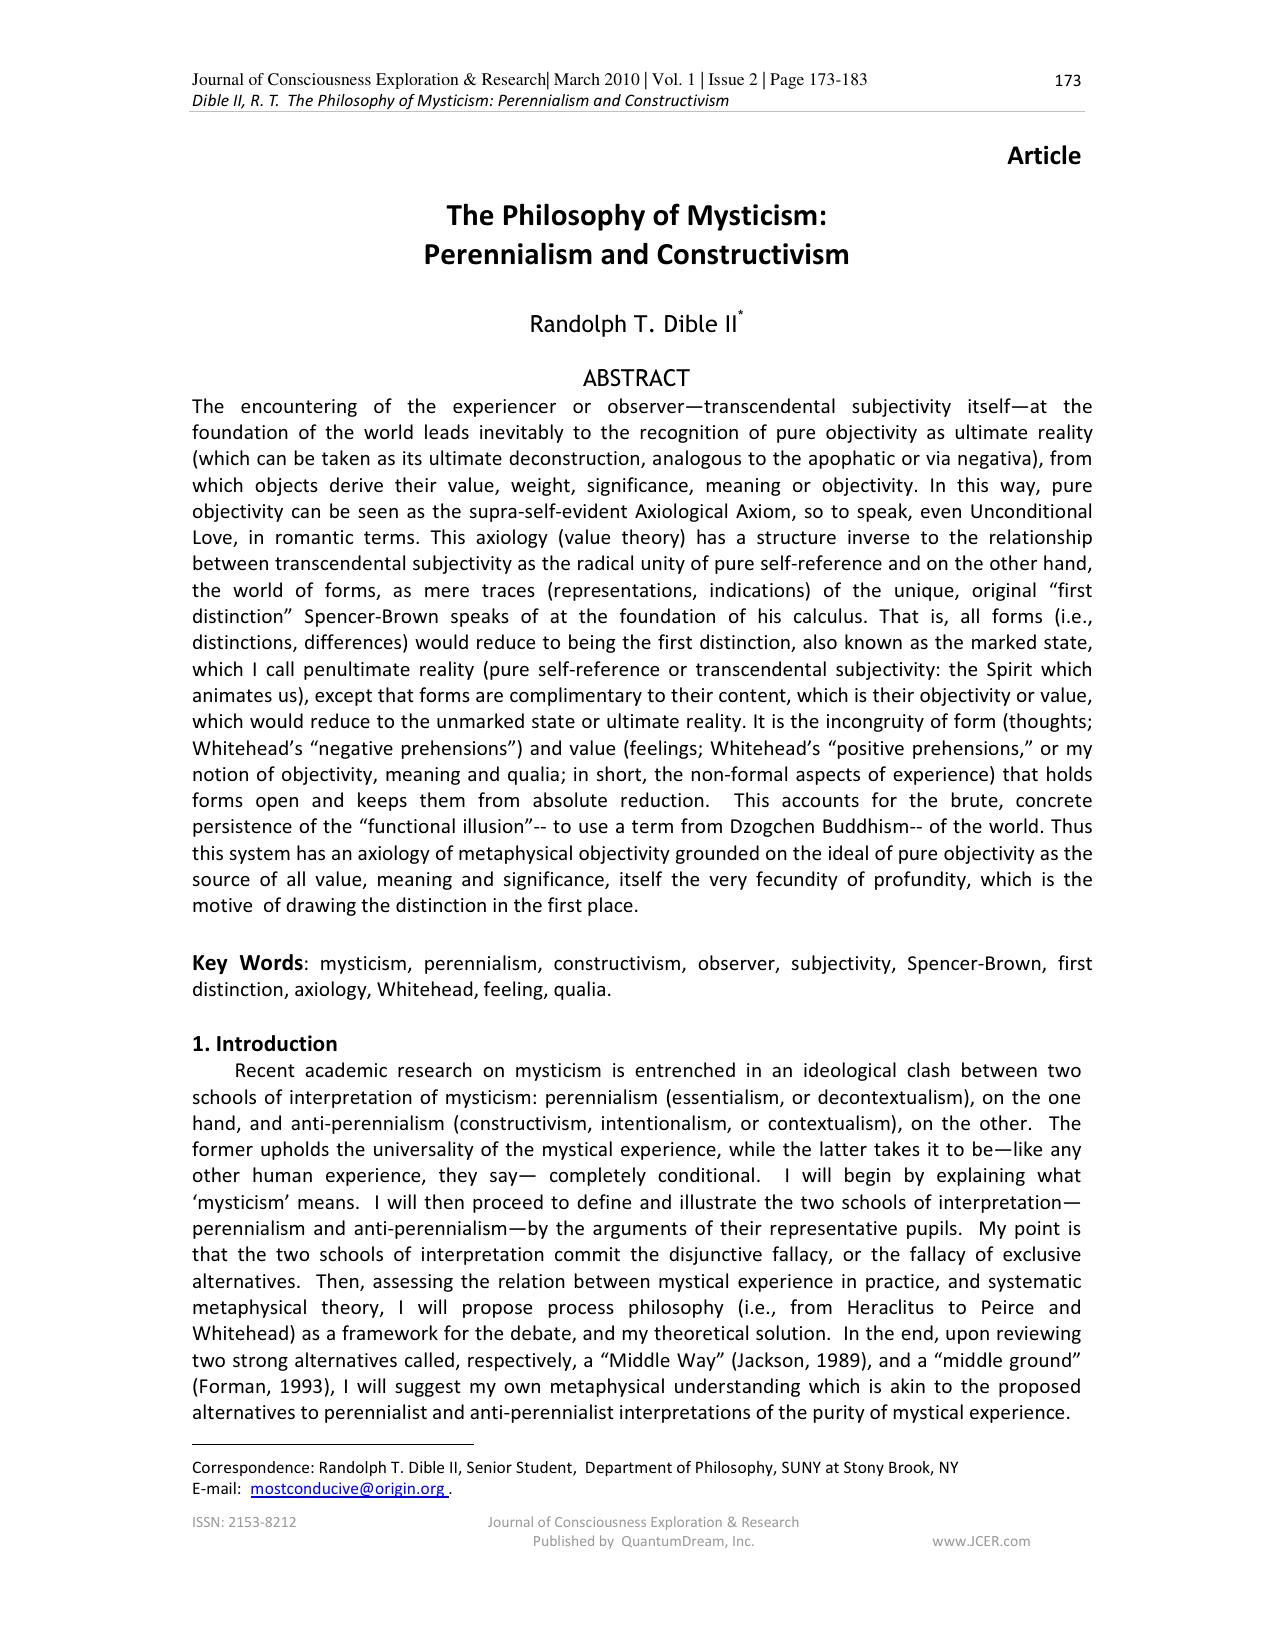 The Philosophy of Mysticism: Perennialism and Constructivism - Paper